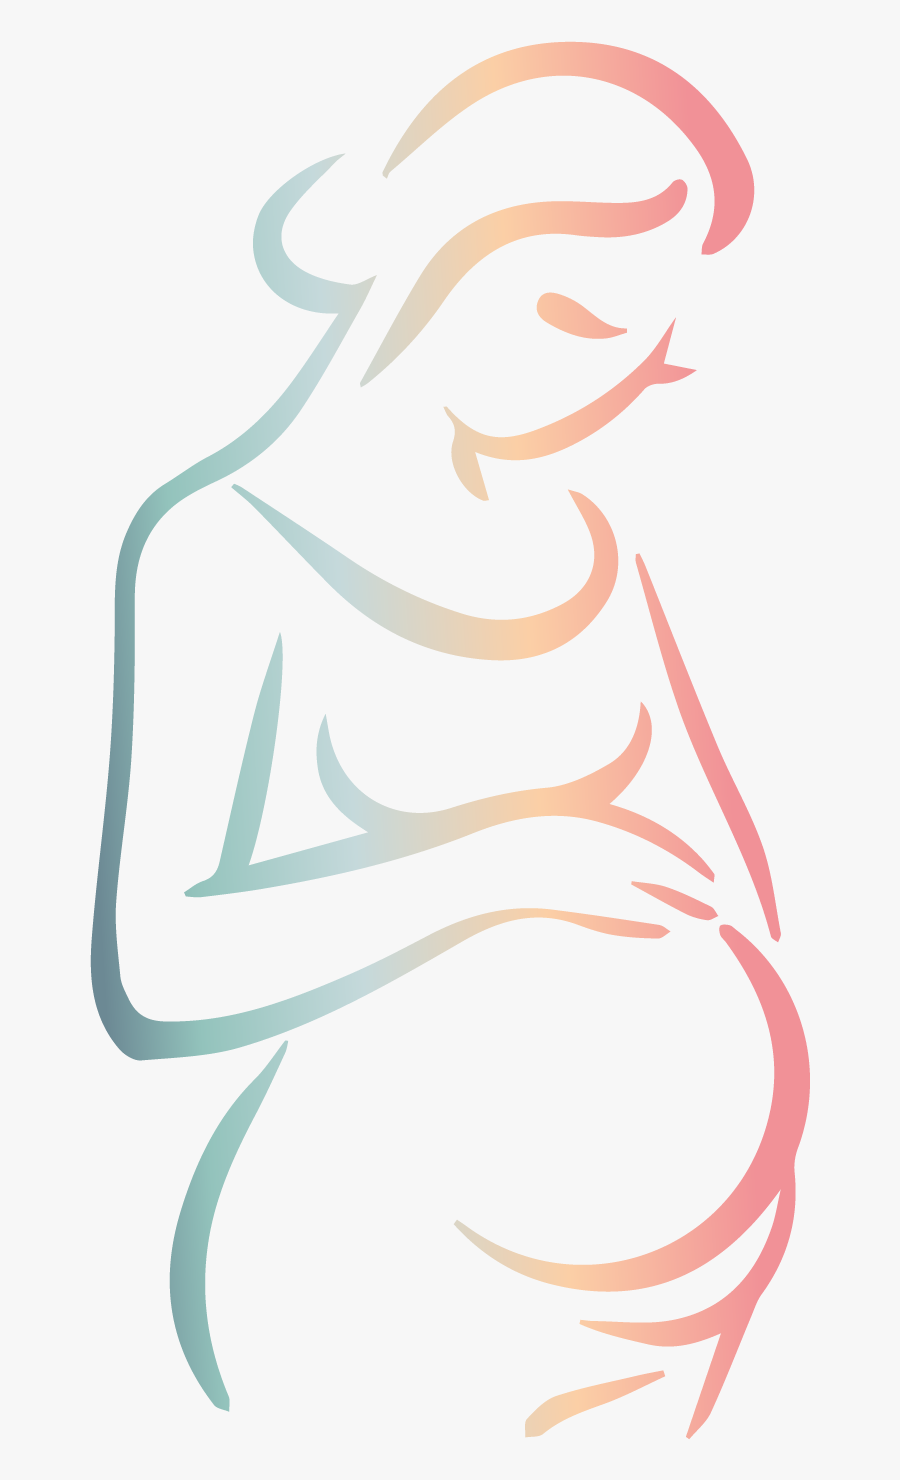 Pregnant Clipart Obstetrics And Gynecology - Neonatal Abstinence Syndrome Clipart, Transparent Clipart